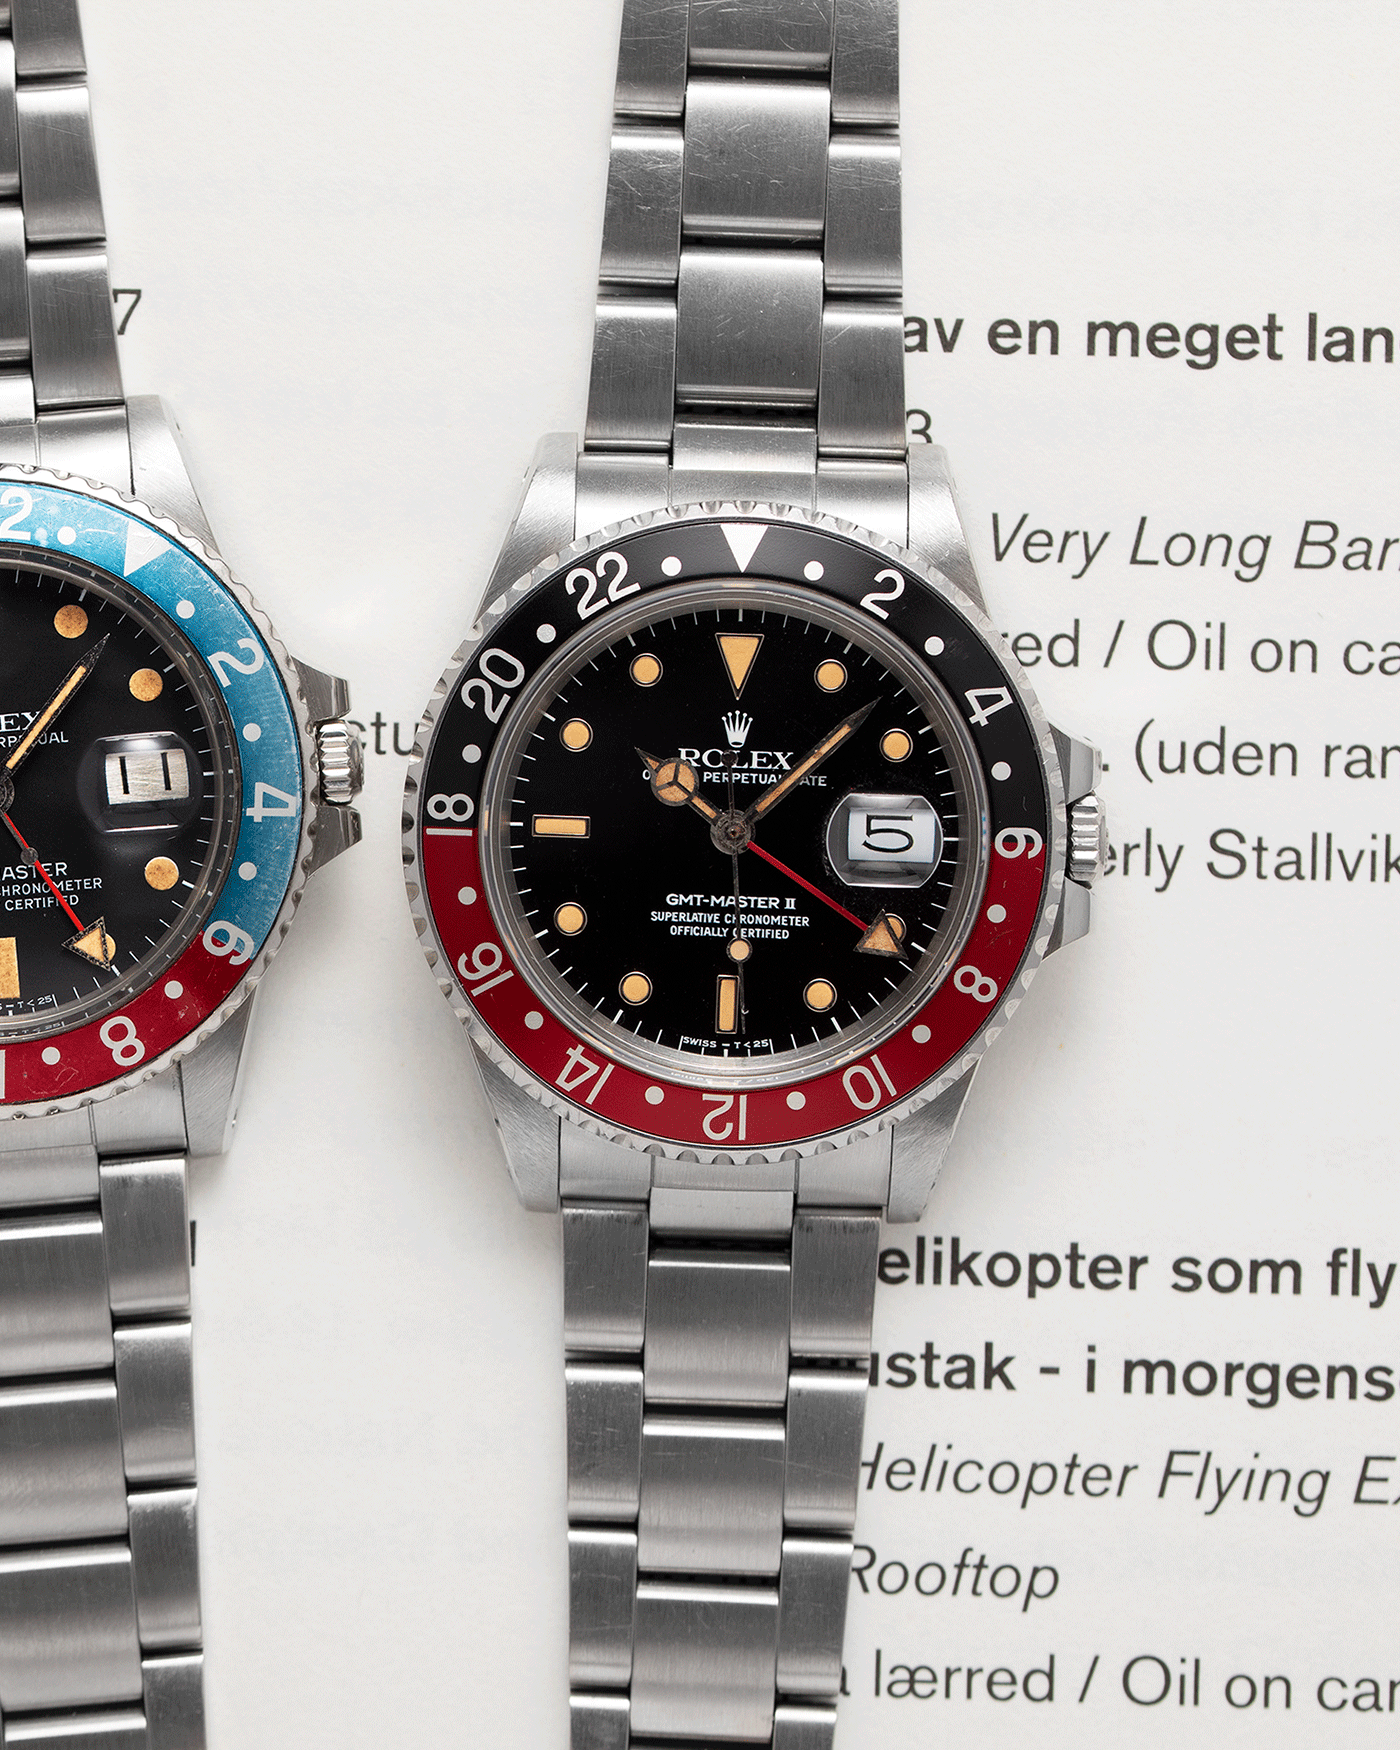 Brand: Rolex Year: 1987 Model: GMT-Master II Reference Number: 16760 Serial Number: 963XXXX Material: Stainless Steel Movement: Cal. 3085 Case Diameter: 40mm Lug Width: 20mm Bracelet/Strap: Rolex Heavy Oyster 78360 with ‘501’ Endlinks and ‘L3’ Clasp